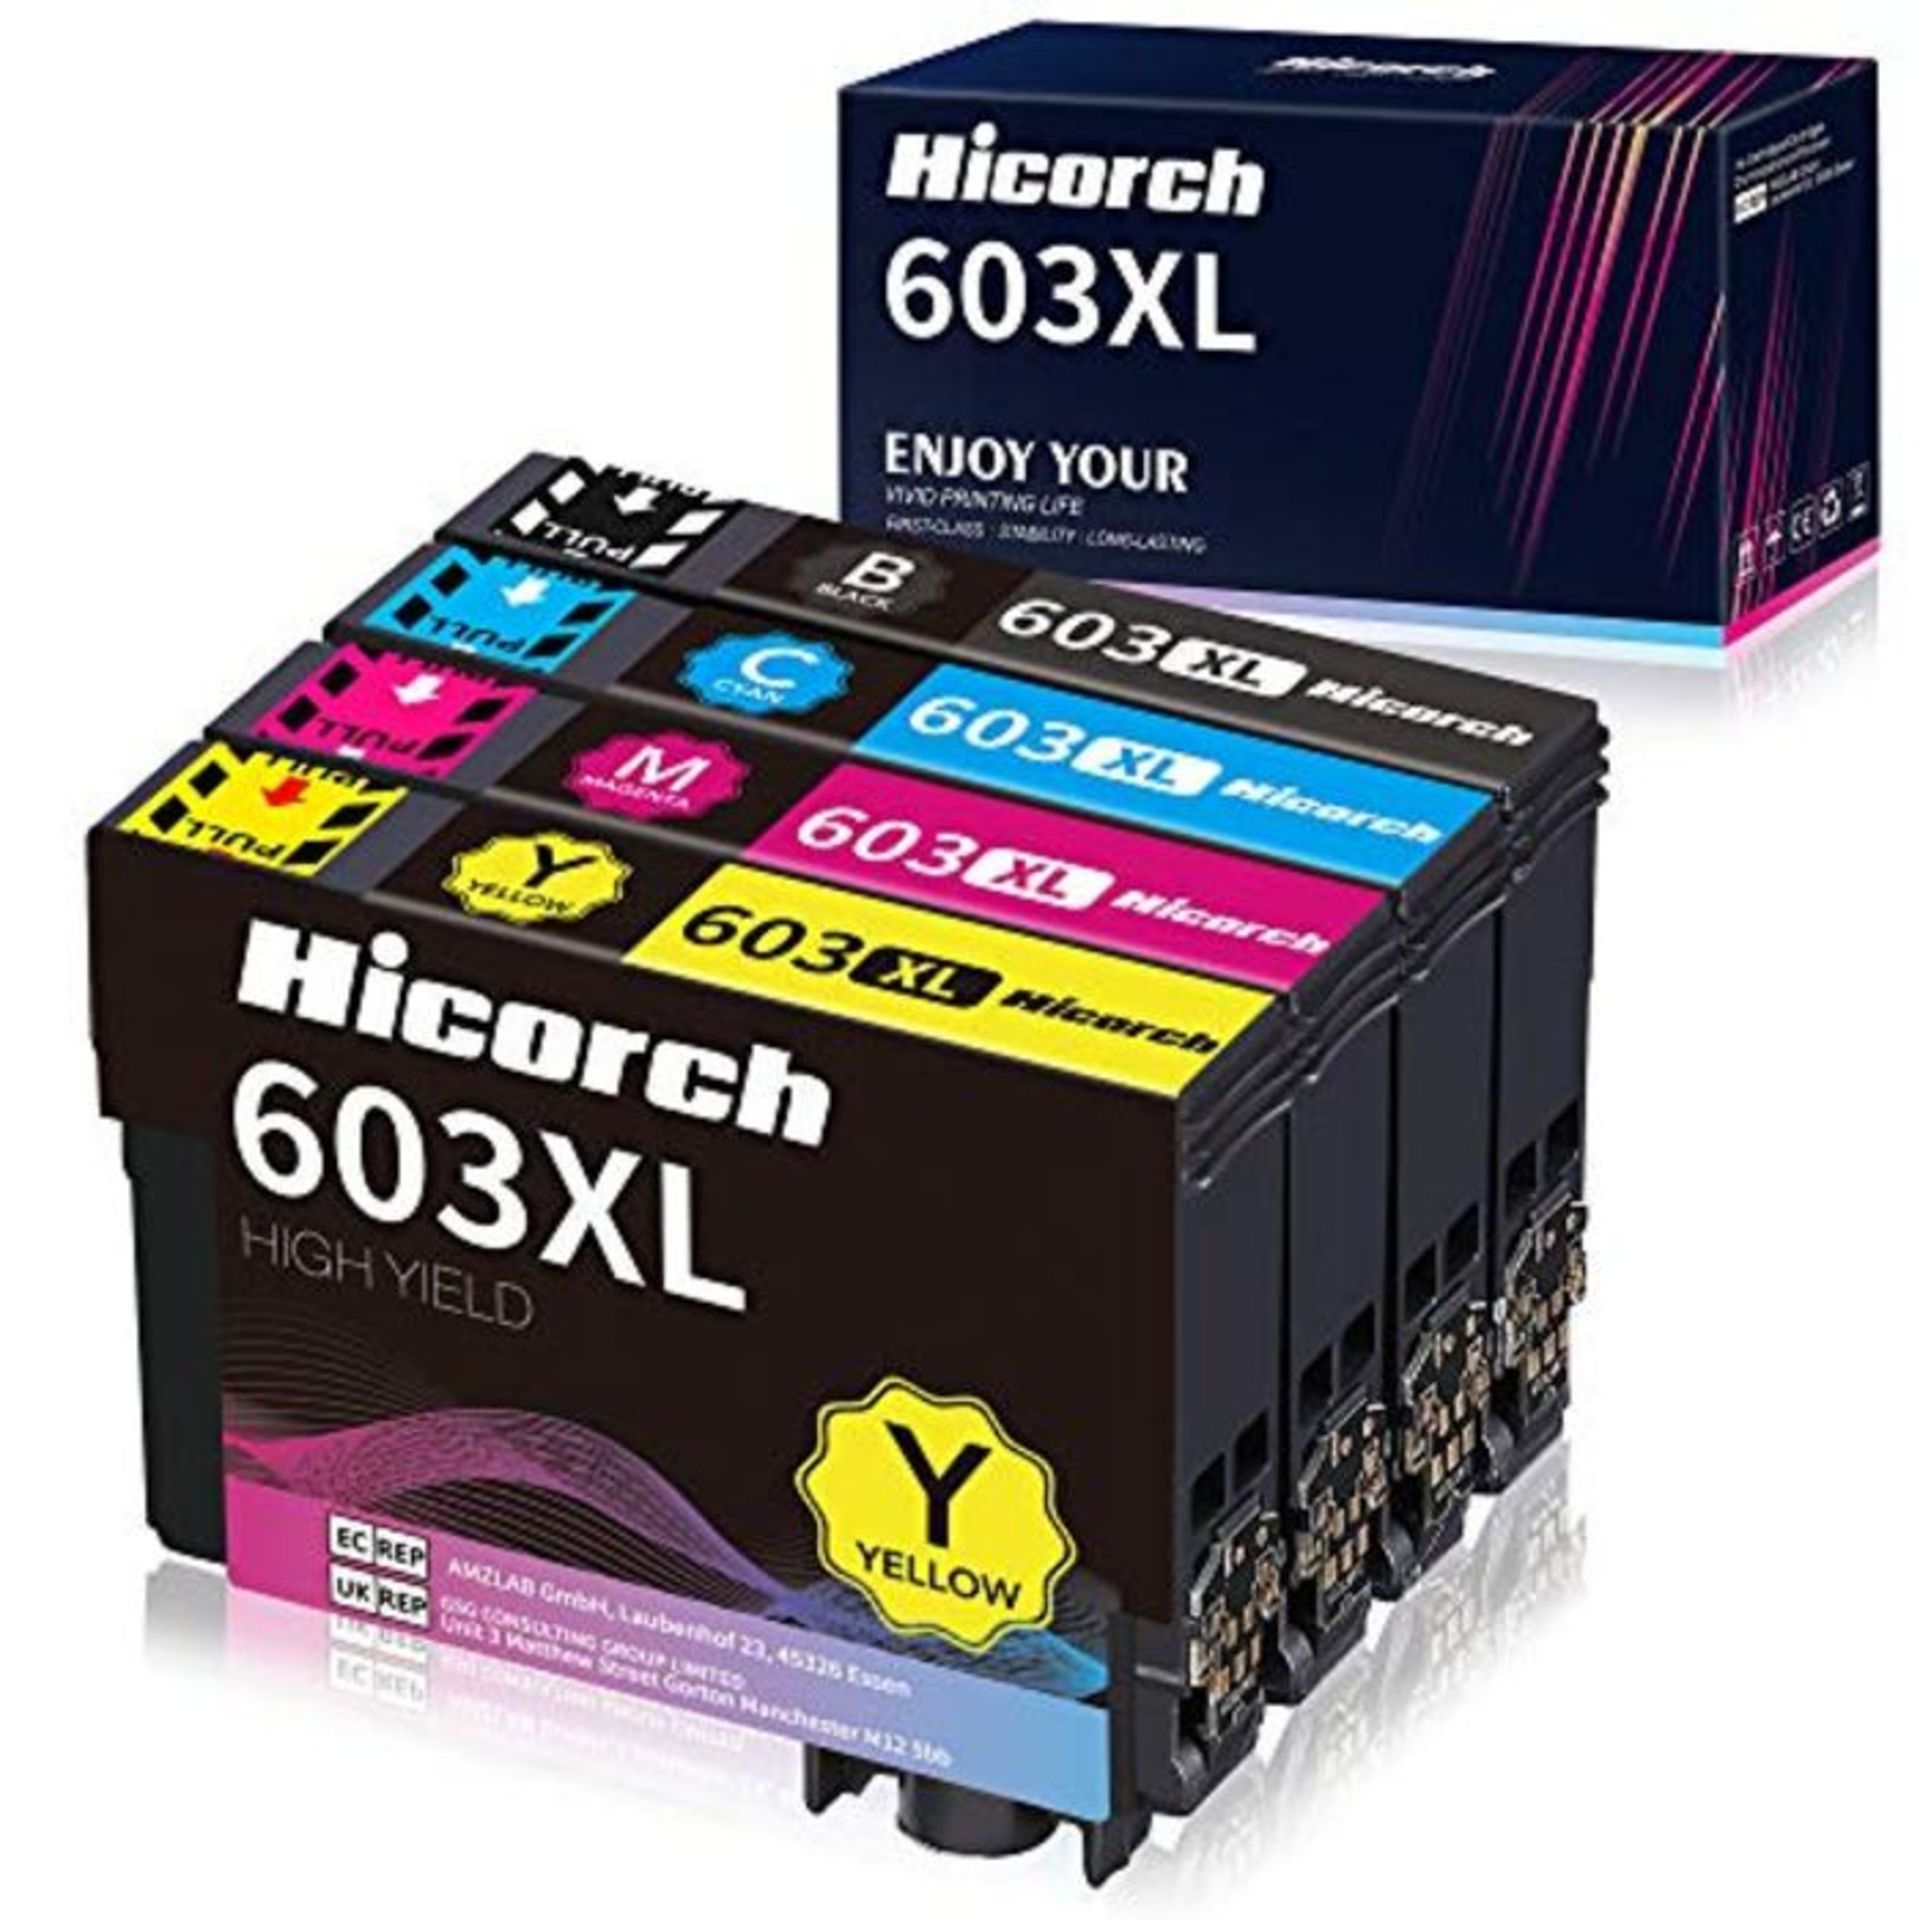 Hicorch 603XL Ink Cartridges Replacement for Epson 603 XL Multipack Compatible with Ep